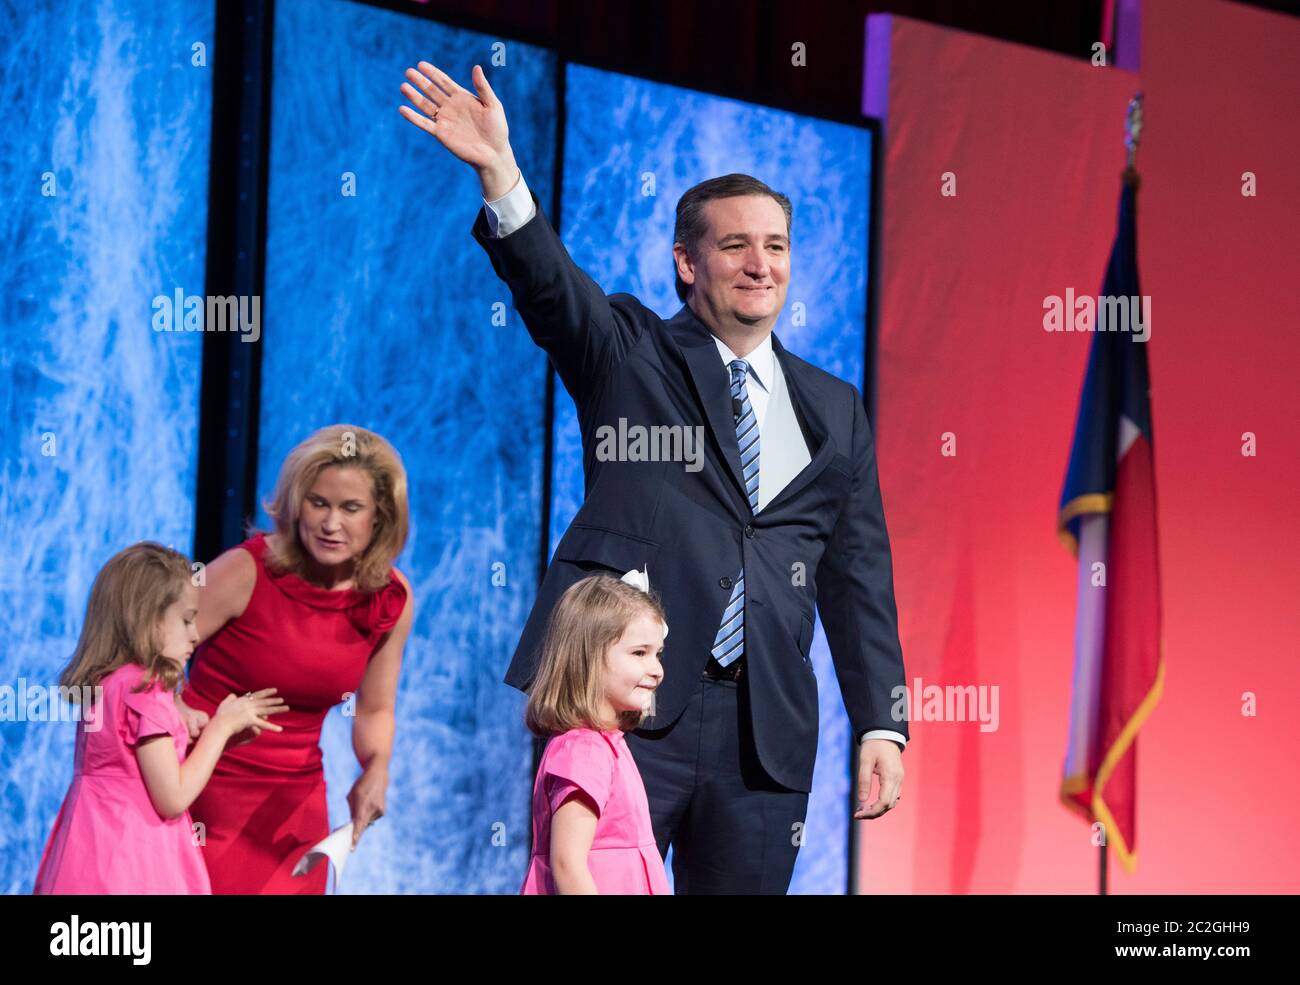 Dallas Texas USA, May 14 2016: U.S. Senator Ted Cruz of Texas waves to an adoring crowd as his wife and young daughters join him onstage at the Republican Party of Texas Convention. ©Bob Daemmrich Stock Photo